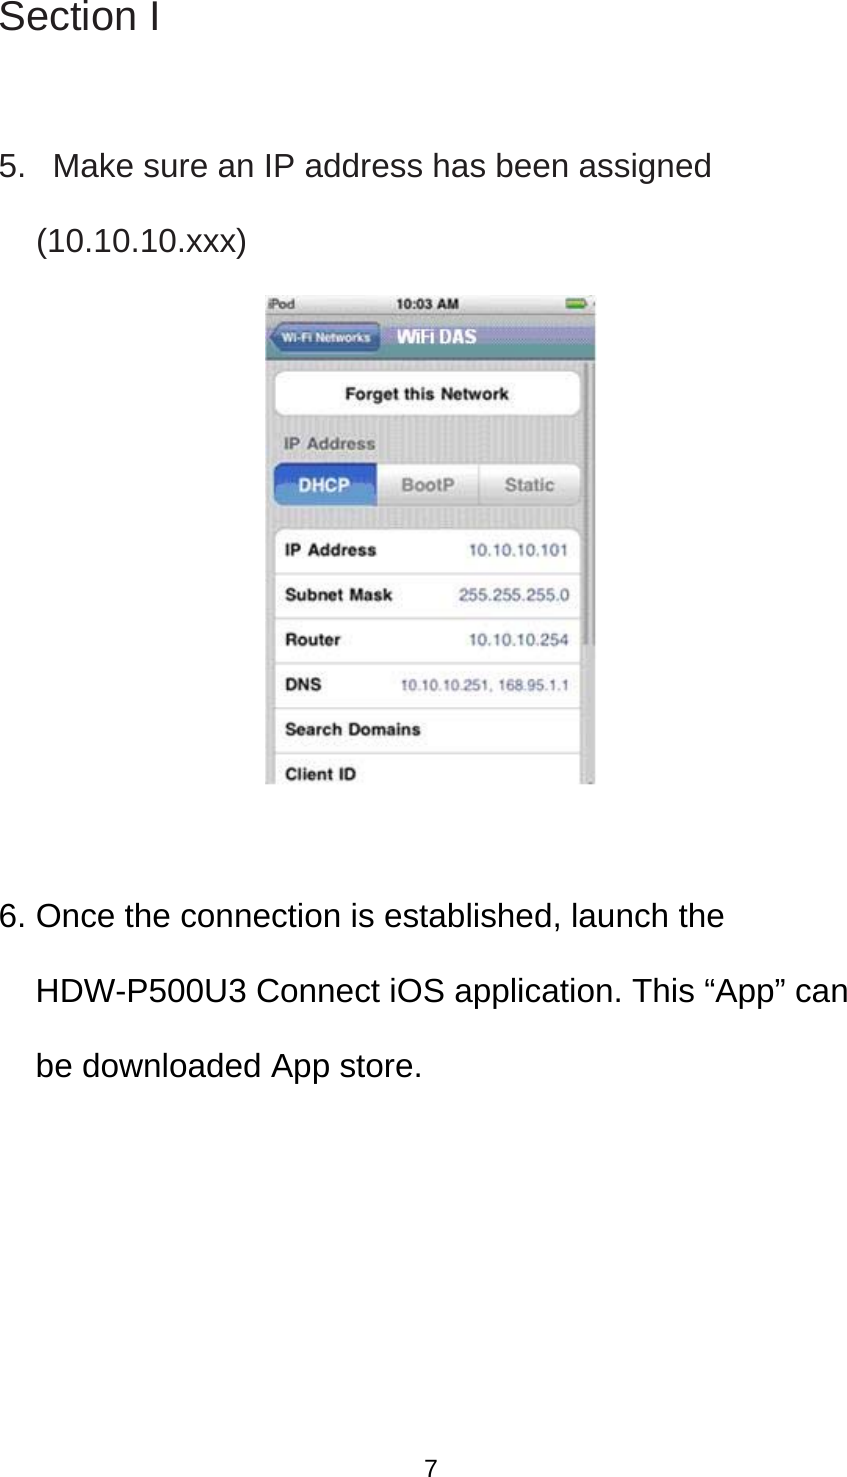 Section I  5.   Make sure an IP address has been assigned (10.10.10.xxx)   6. Once the connection is established, launch the HDW-P500U3 Connect iOS application. This “App” can be downloaded App store.      7